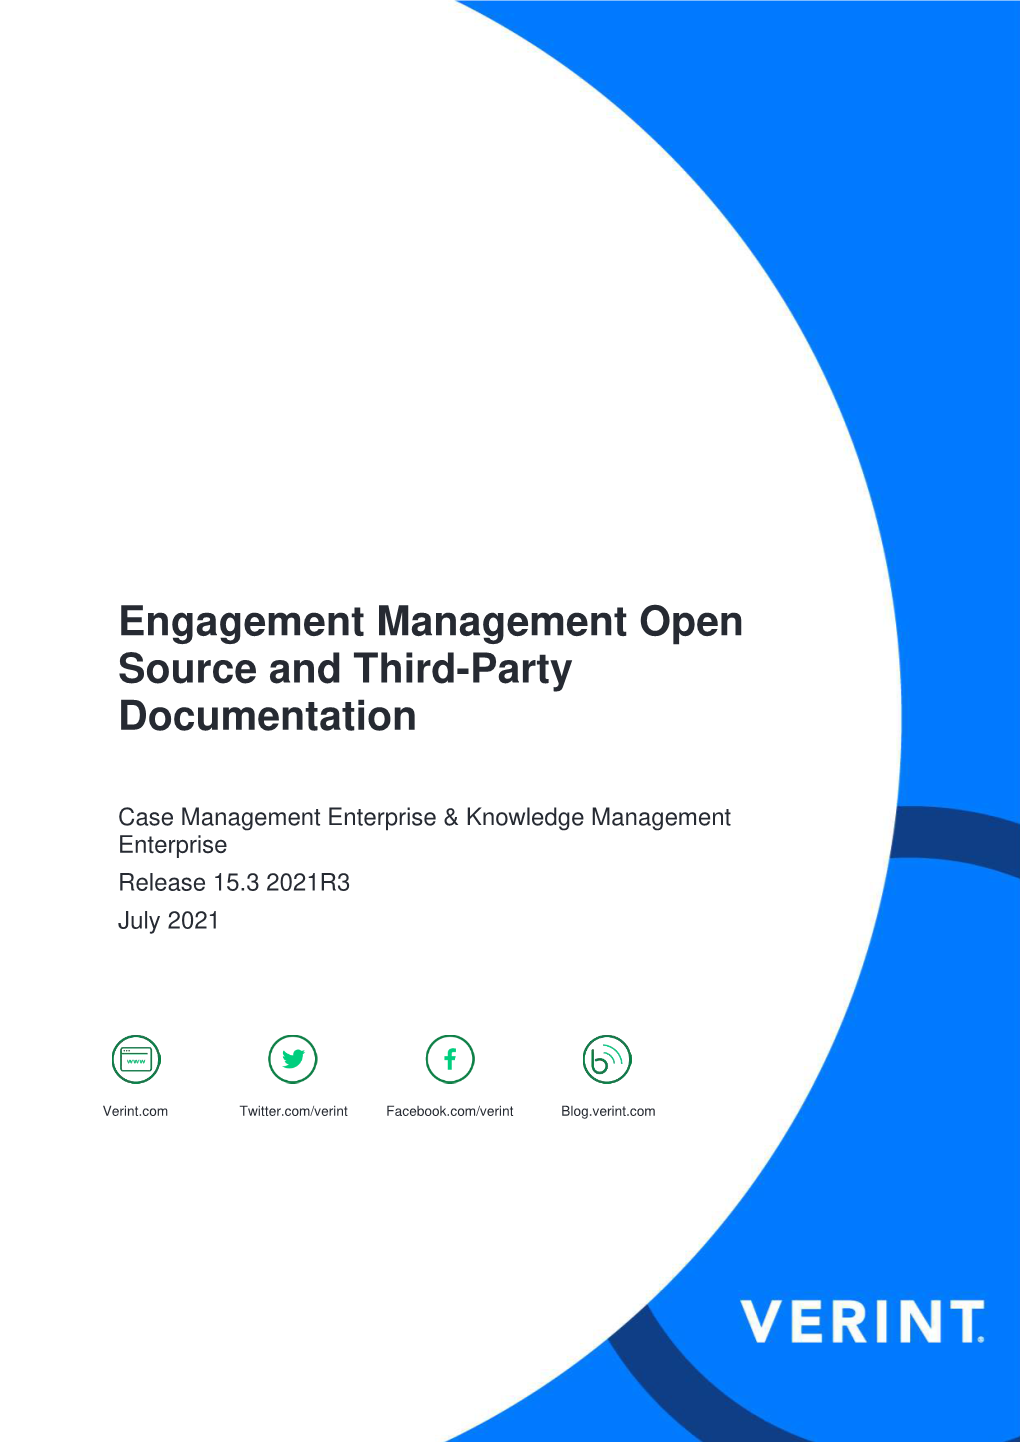 EM Open Source and Third Party Documentation 15.3 2021R3